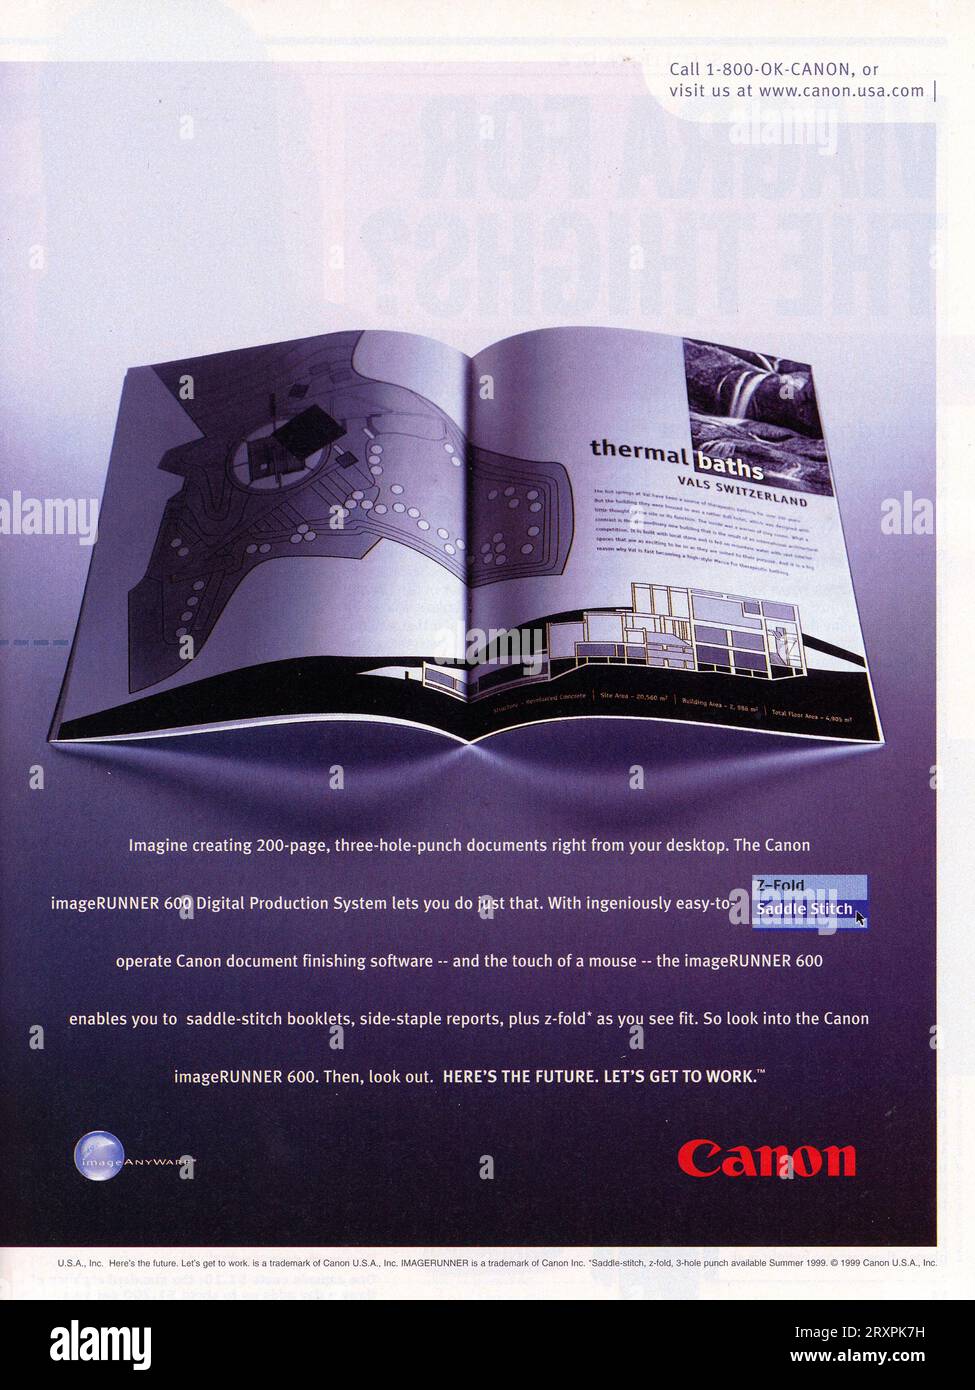 Vintage 'Time' Magazine 10 May 1999 issue Advert, USA Stock Photo